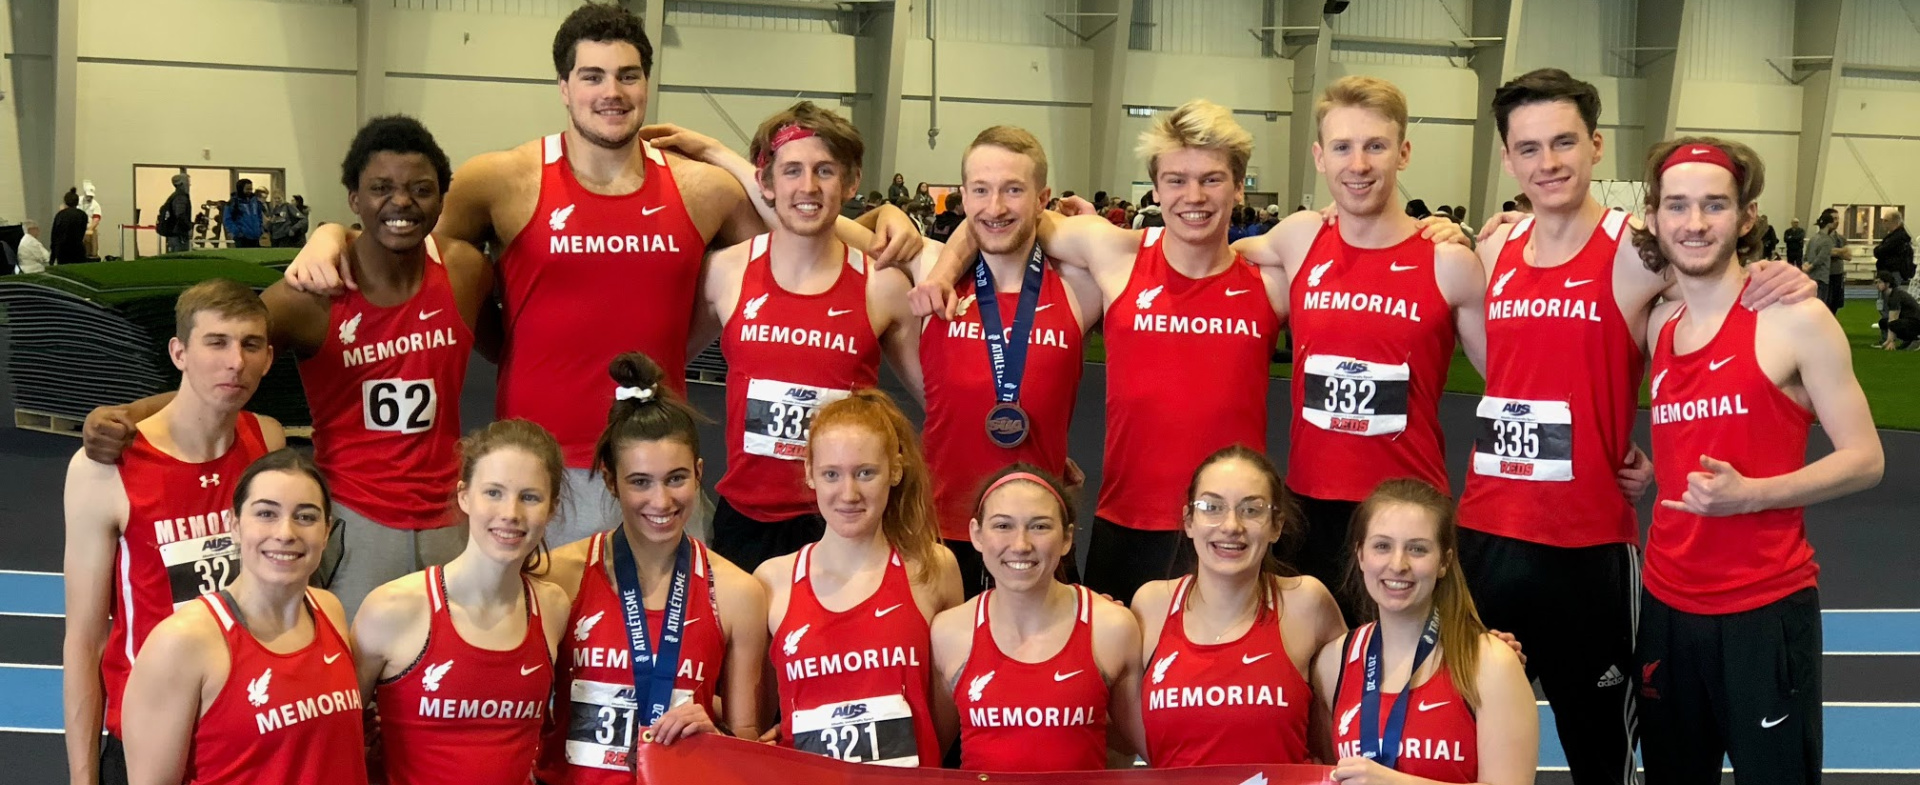 Hawks Take Home 3 Medals at AUS Championships